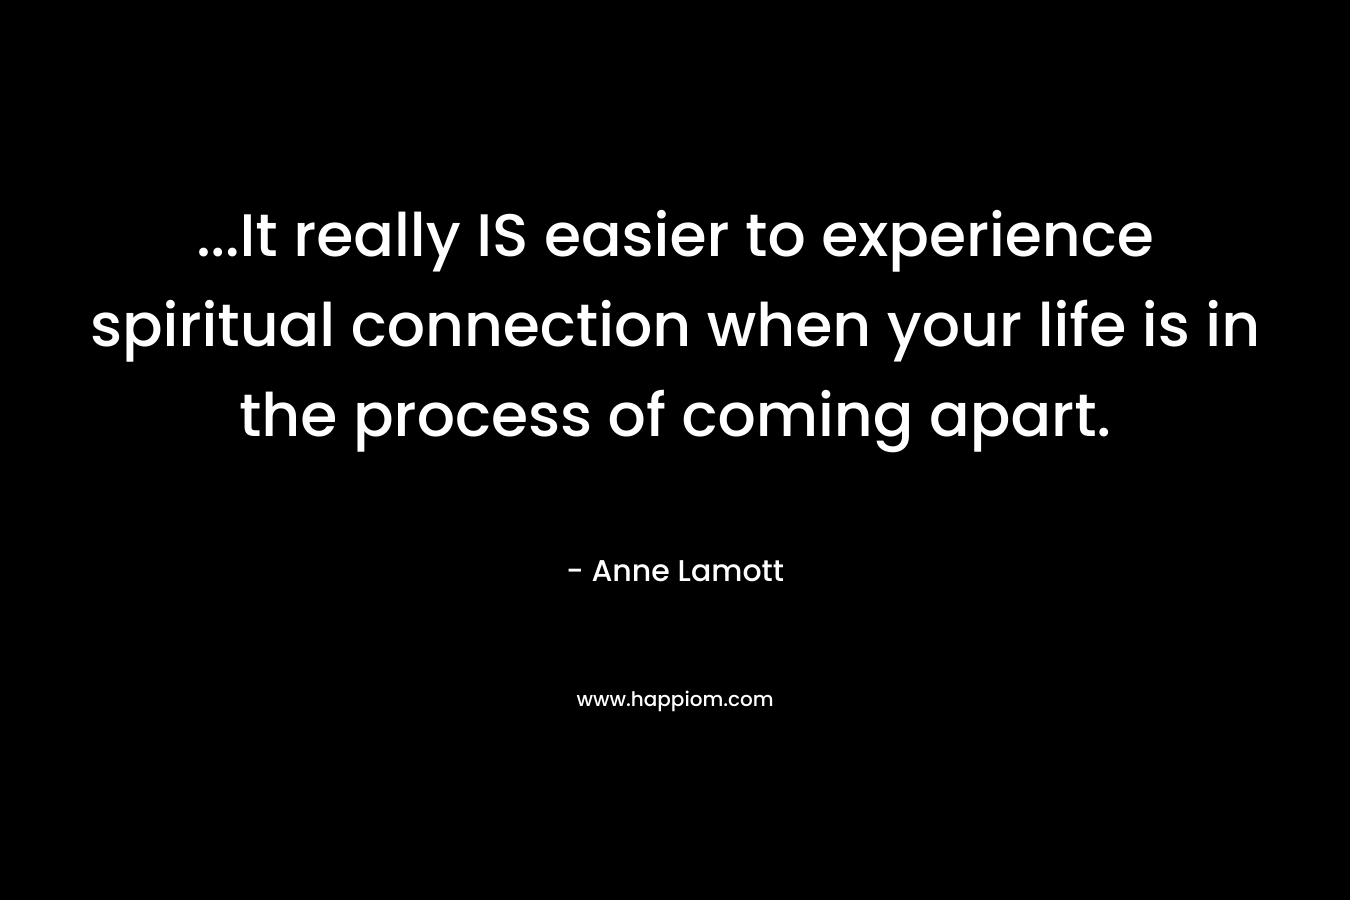 ...It really IS easier to experience spiritual connection when your life is in the process of coming apart.